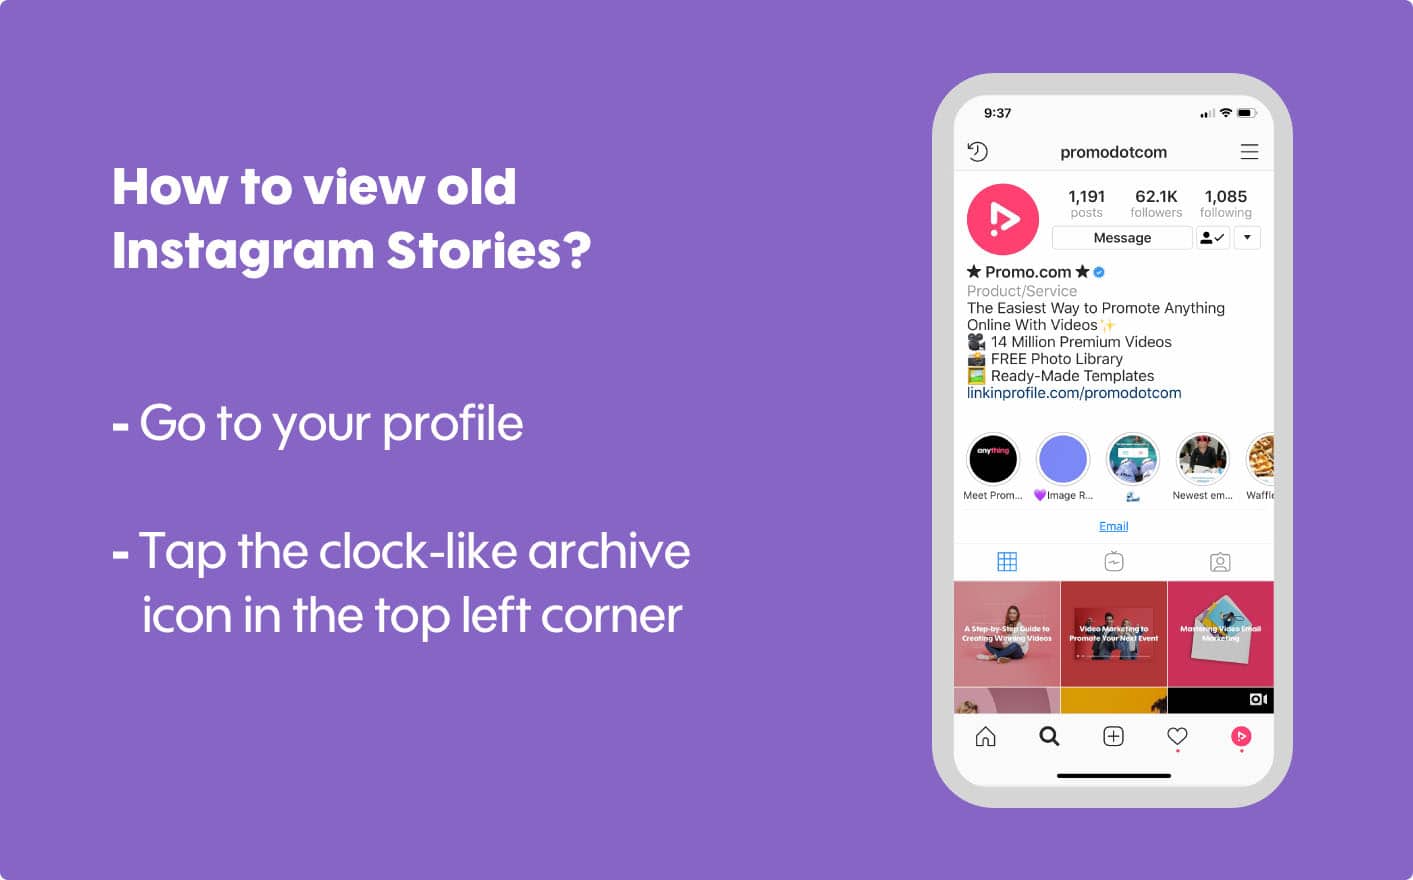 How to view old Instagram Stories?